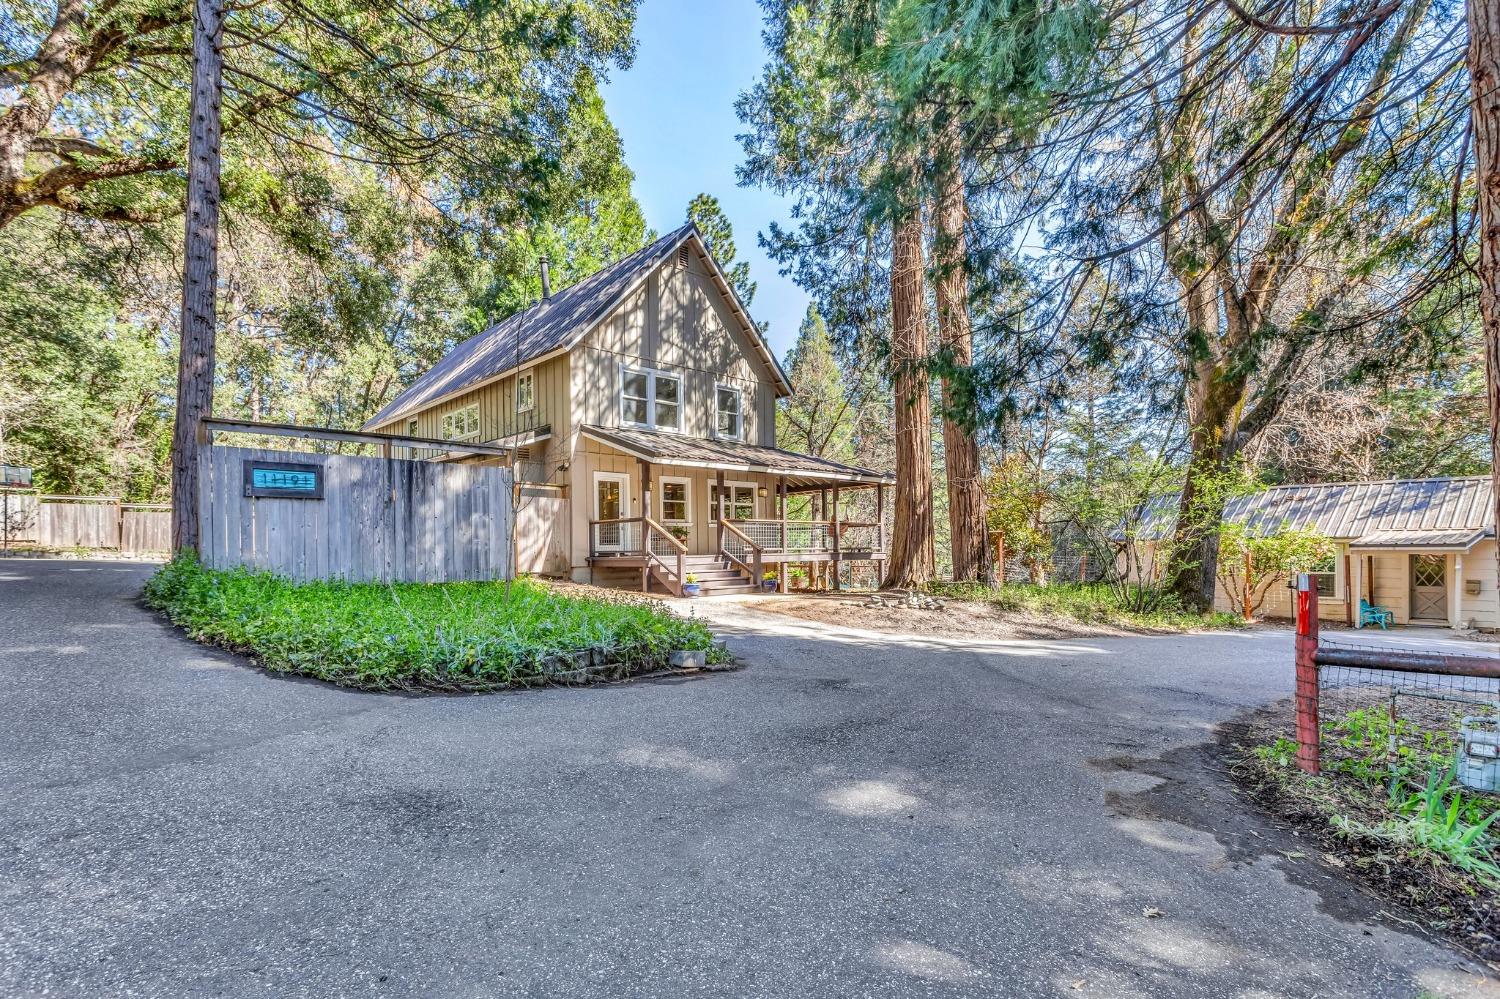 Photo of 11191 Silver Willow Ln in Nevada City, CA